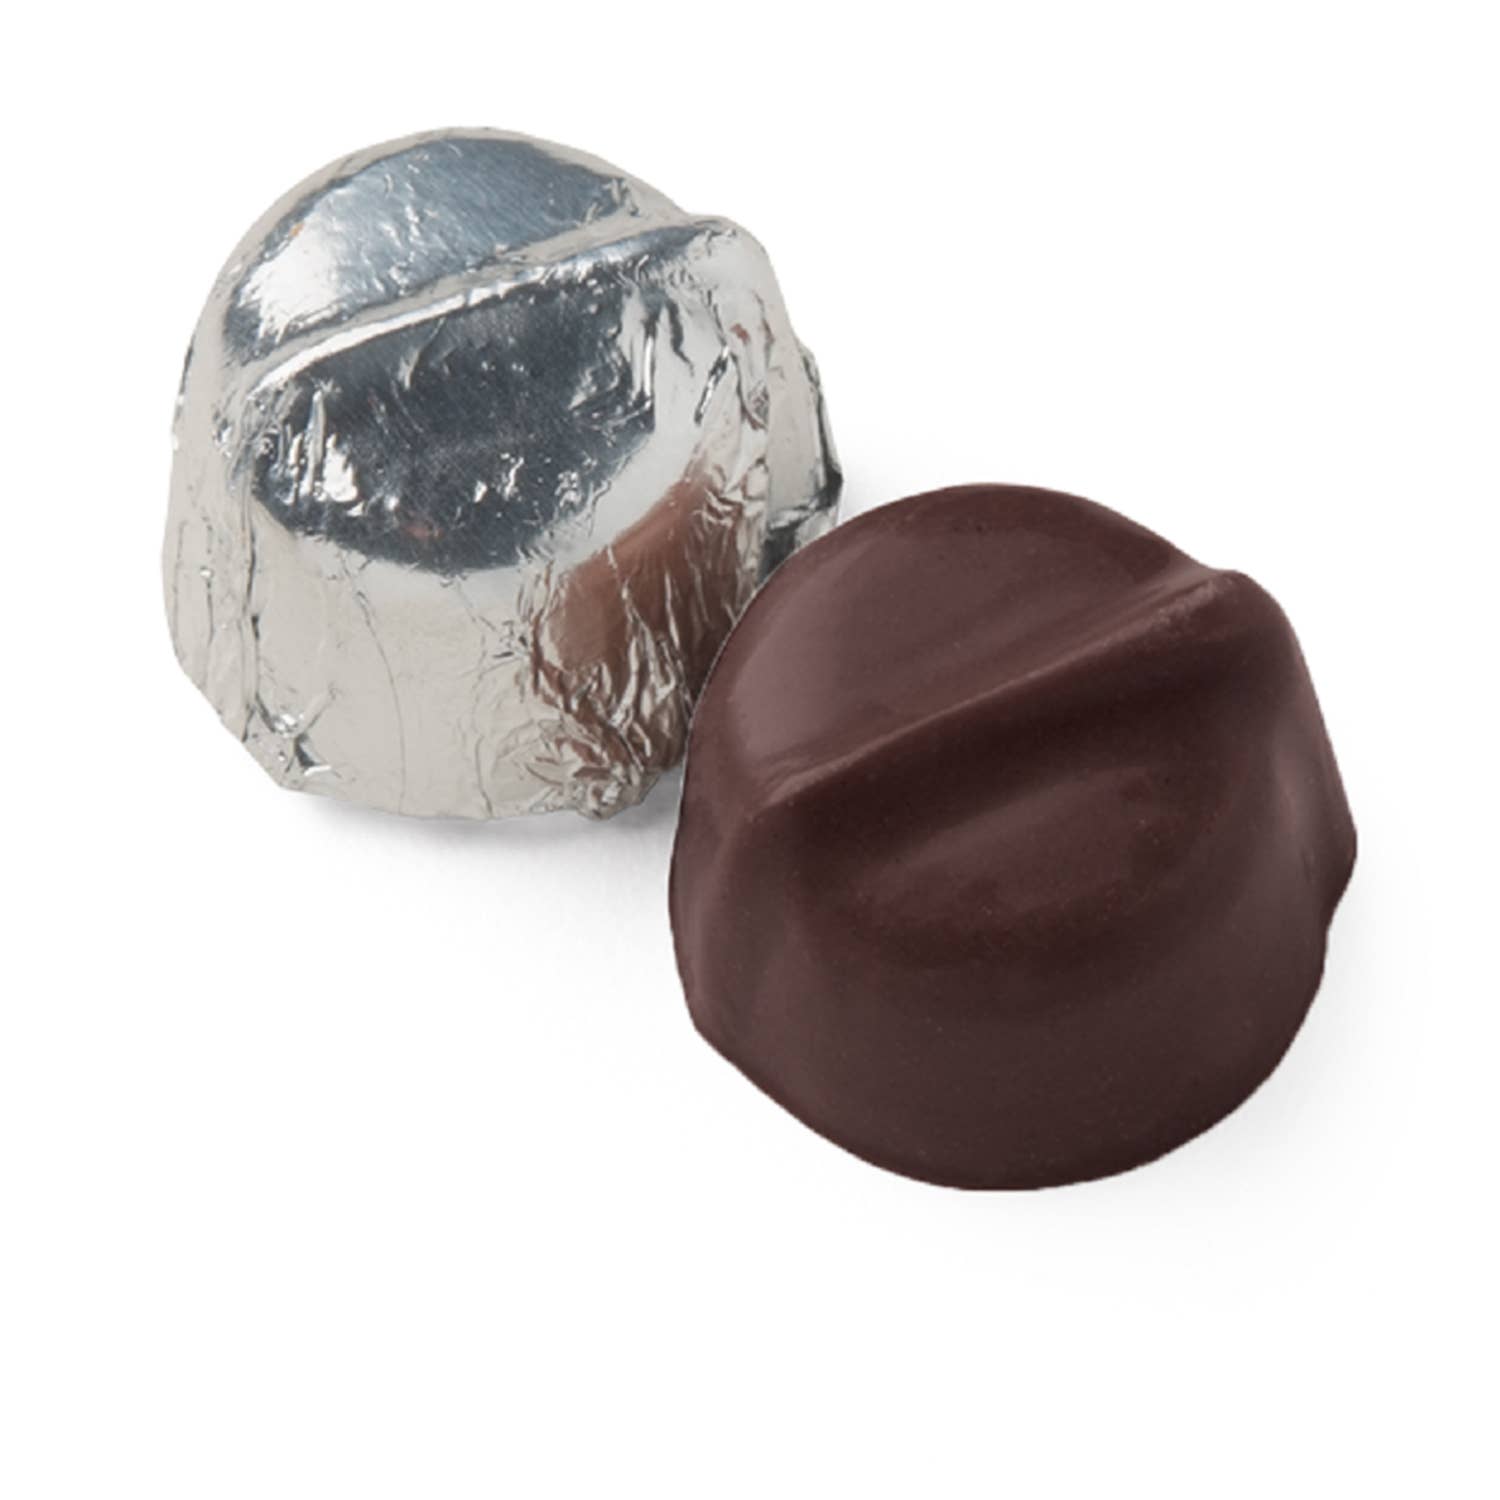 A closeup view of the Vermont Nut Free Dark Chocolate Foiled Drops